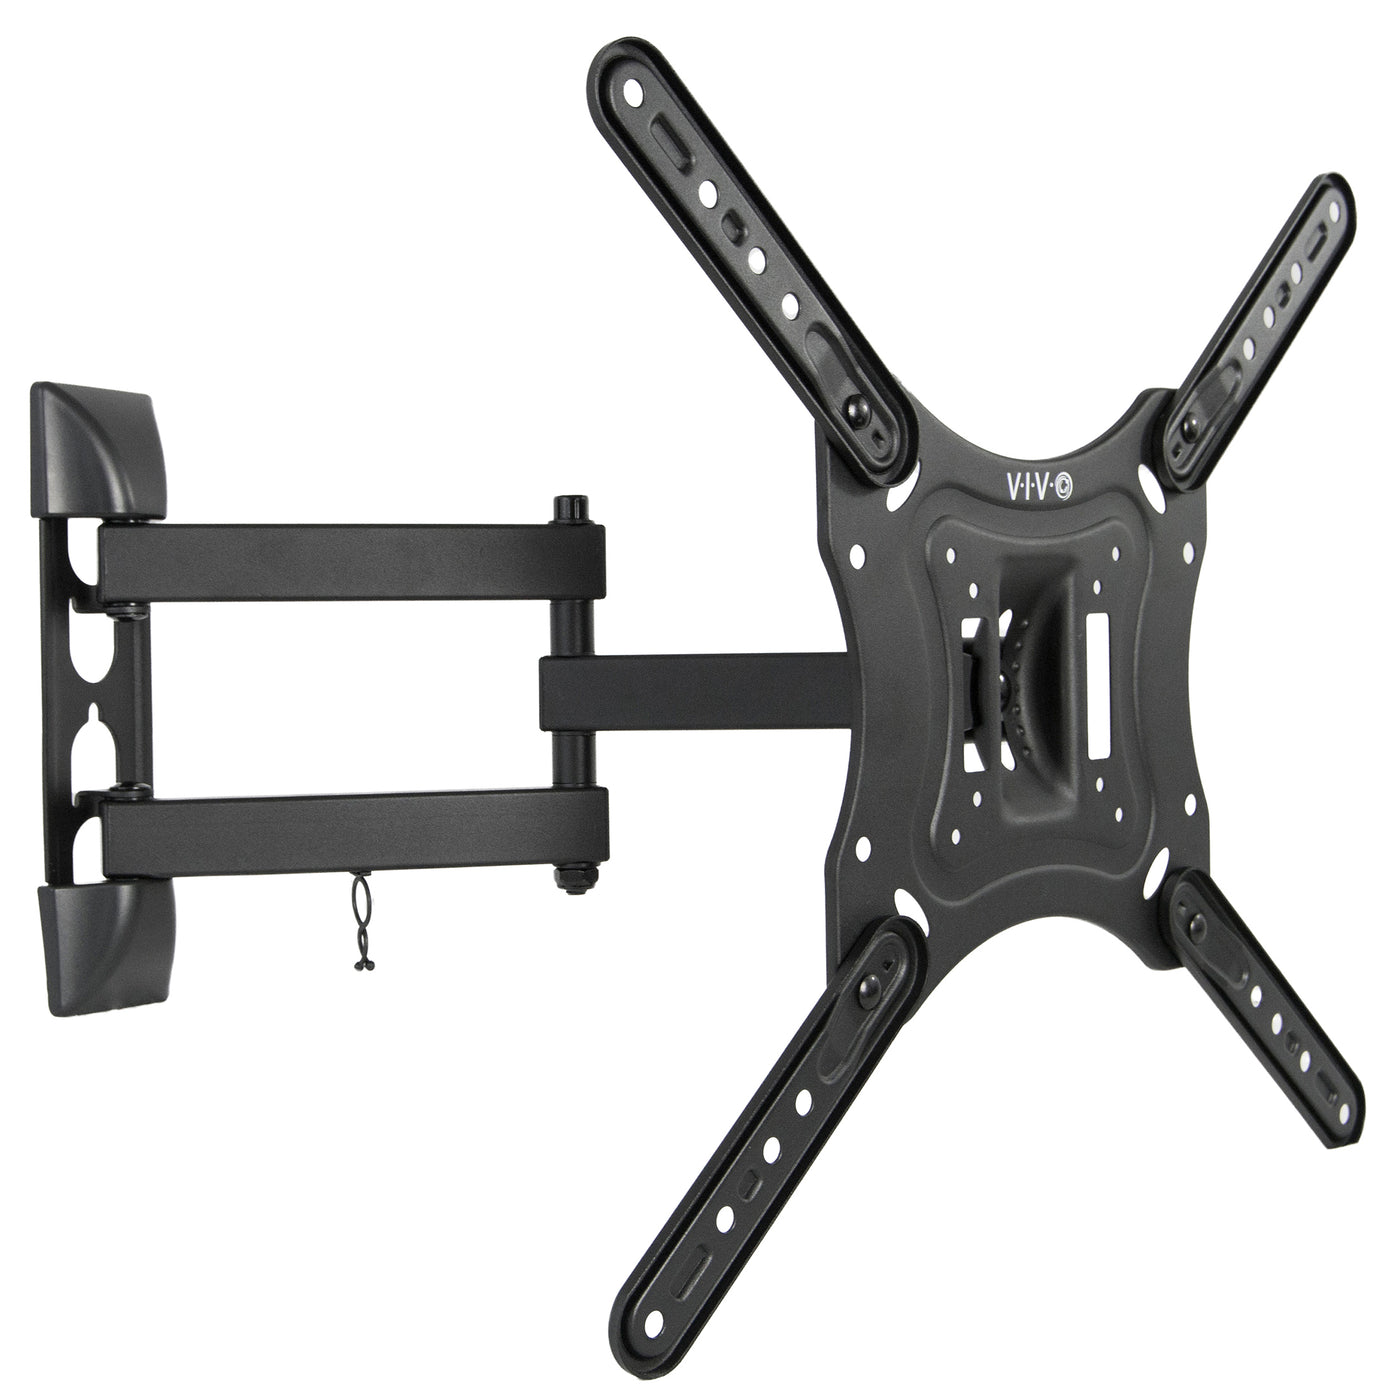 Sturdy adjustable TV wall mount with cable management.